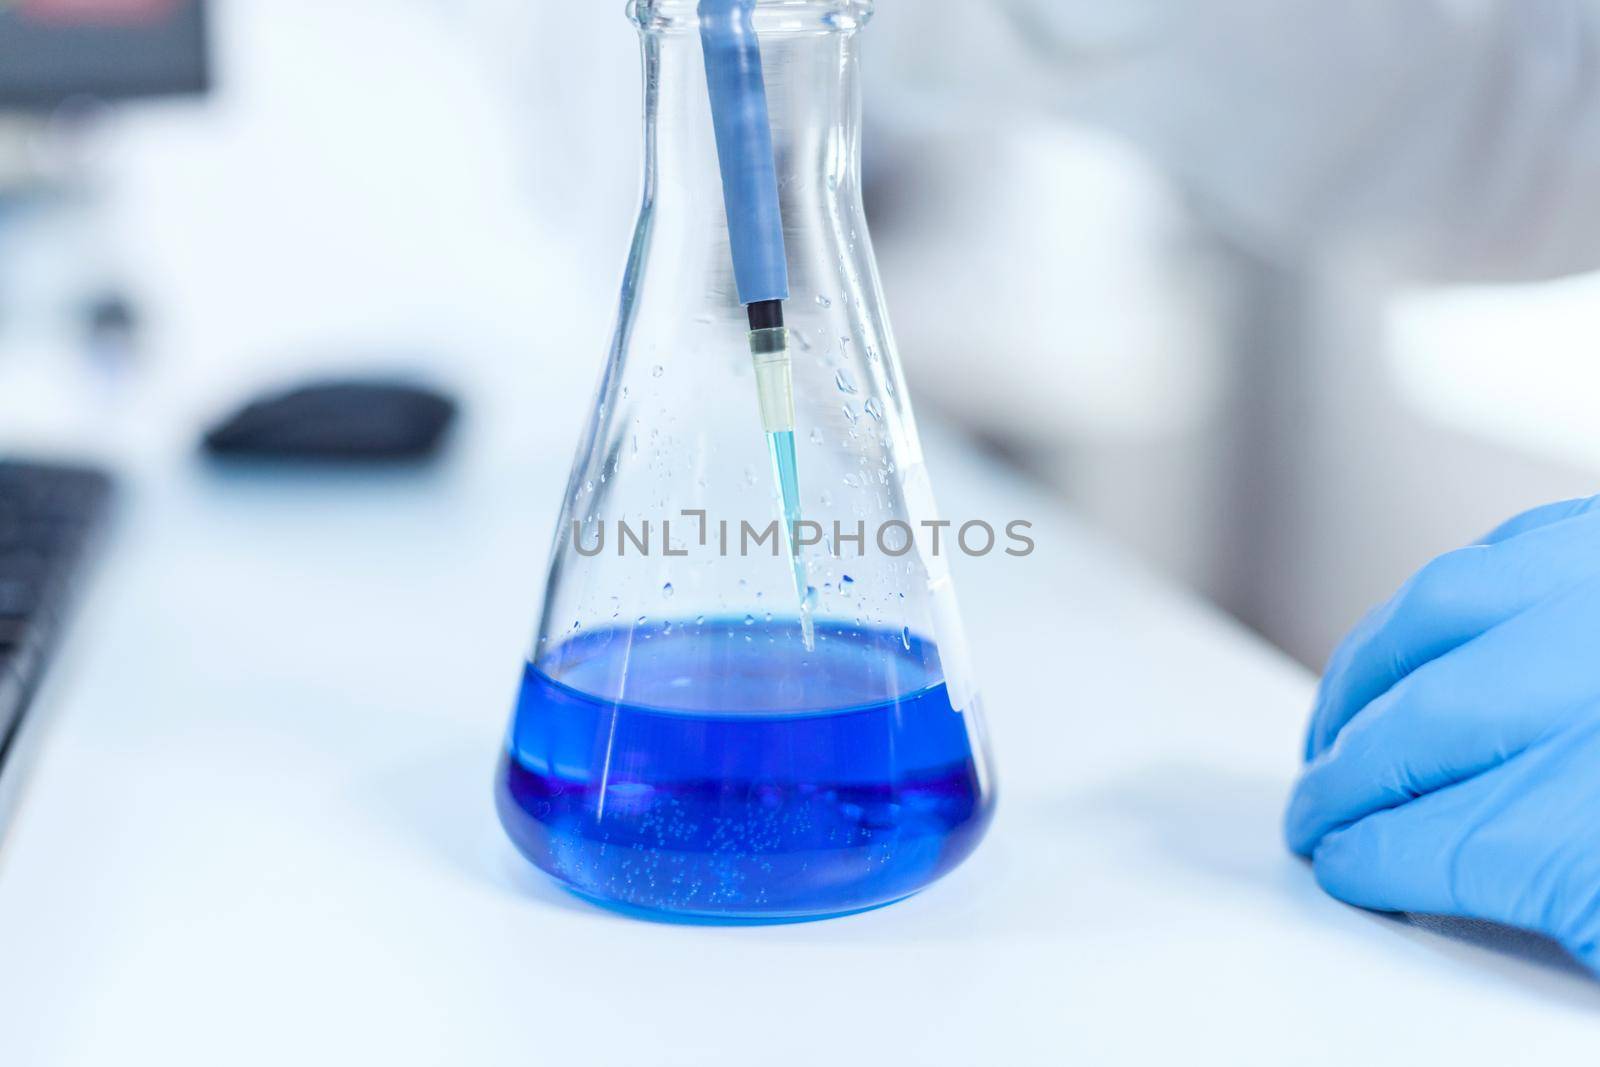 Employee of the scientific laboratory examining the liquid in a laboratory flask by DCStudio